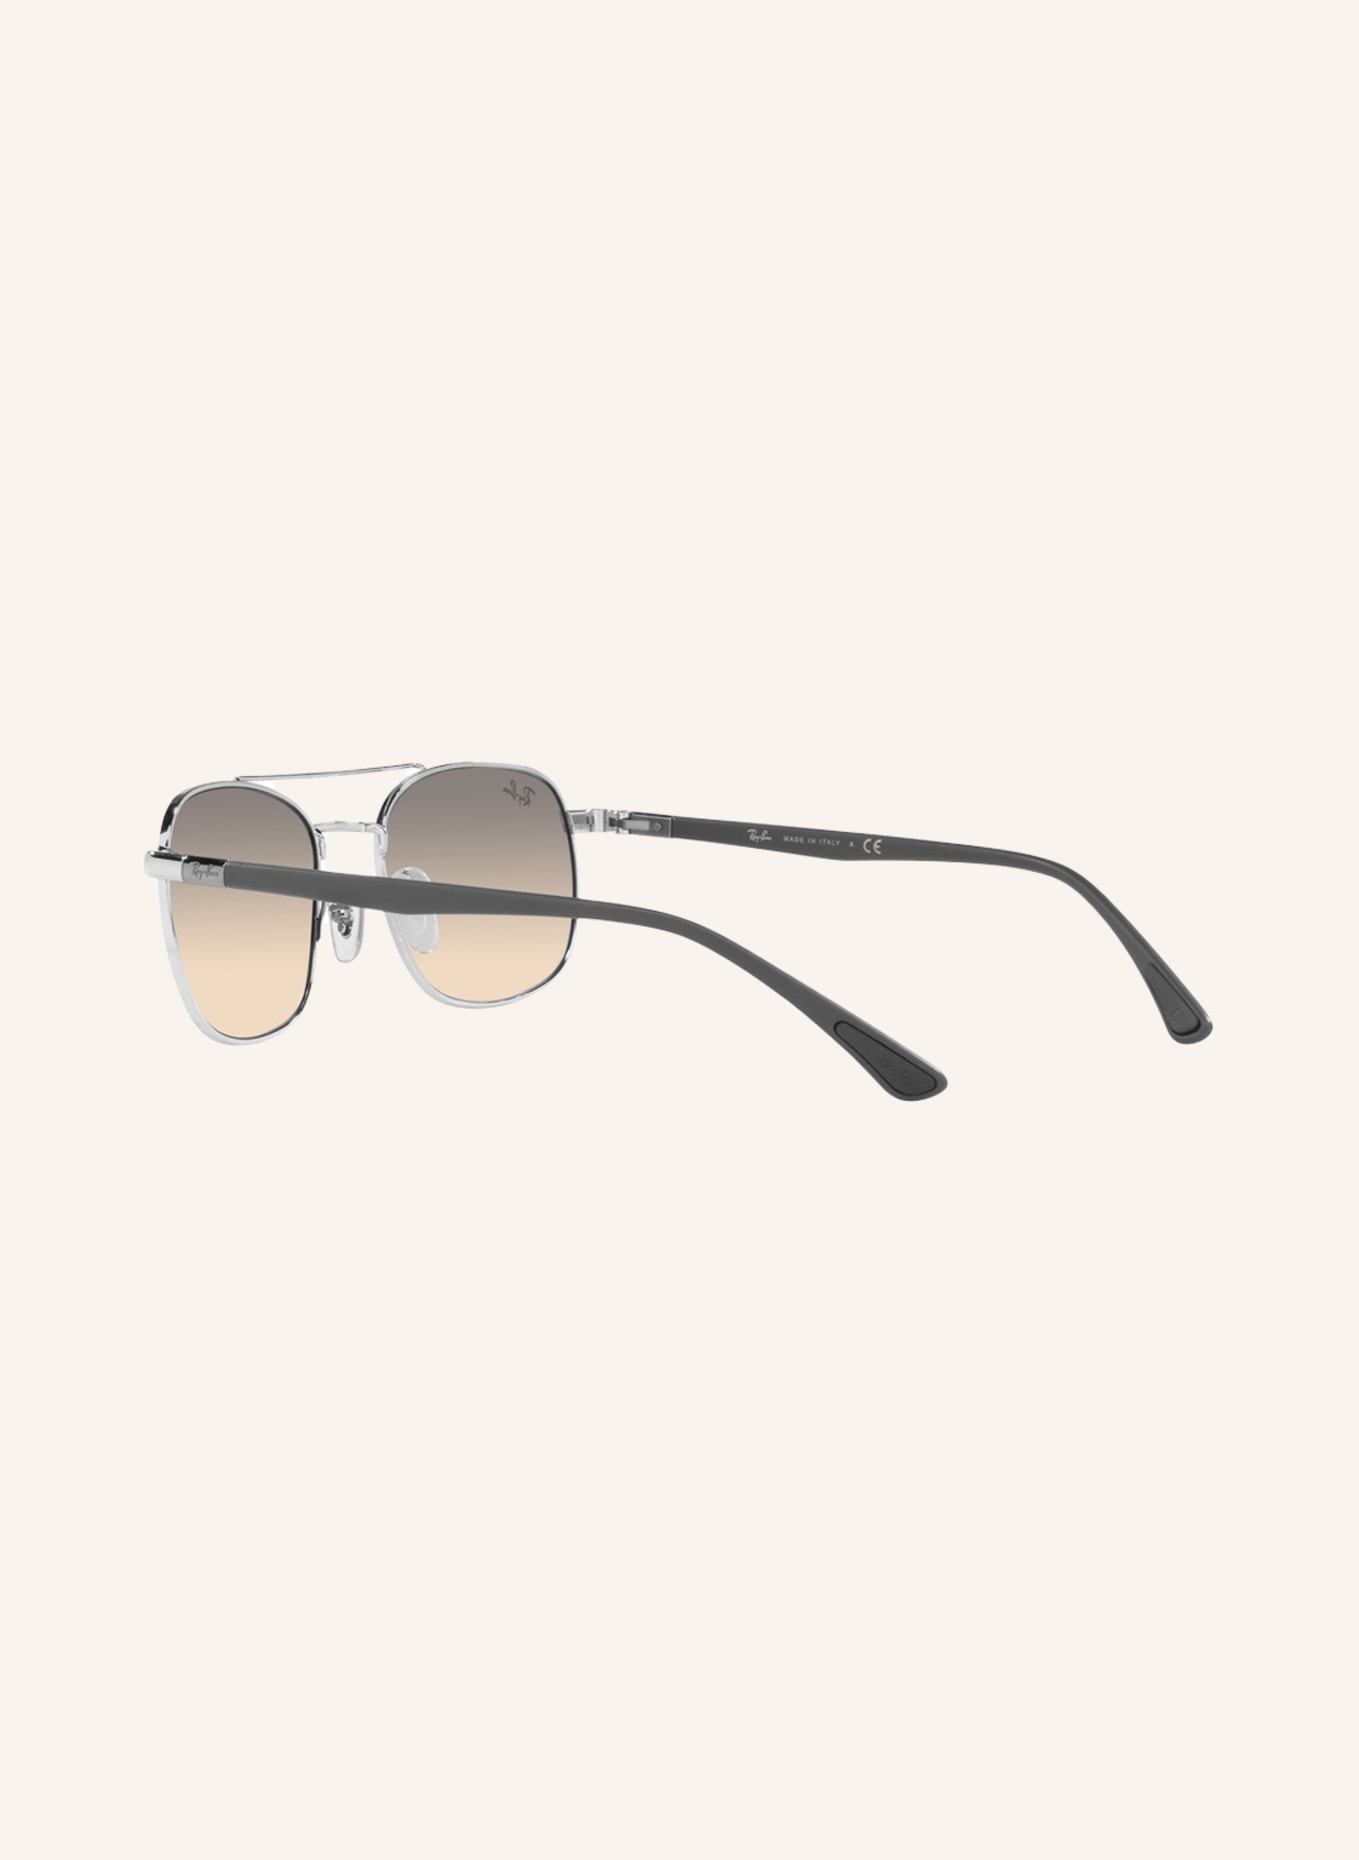 Ray-Ban Sunglasses RB3670, Color: 003/32 - SILVER/LIGHT GRAY GRADIENT (Image 4)